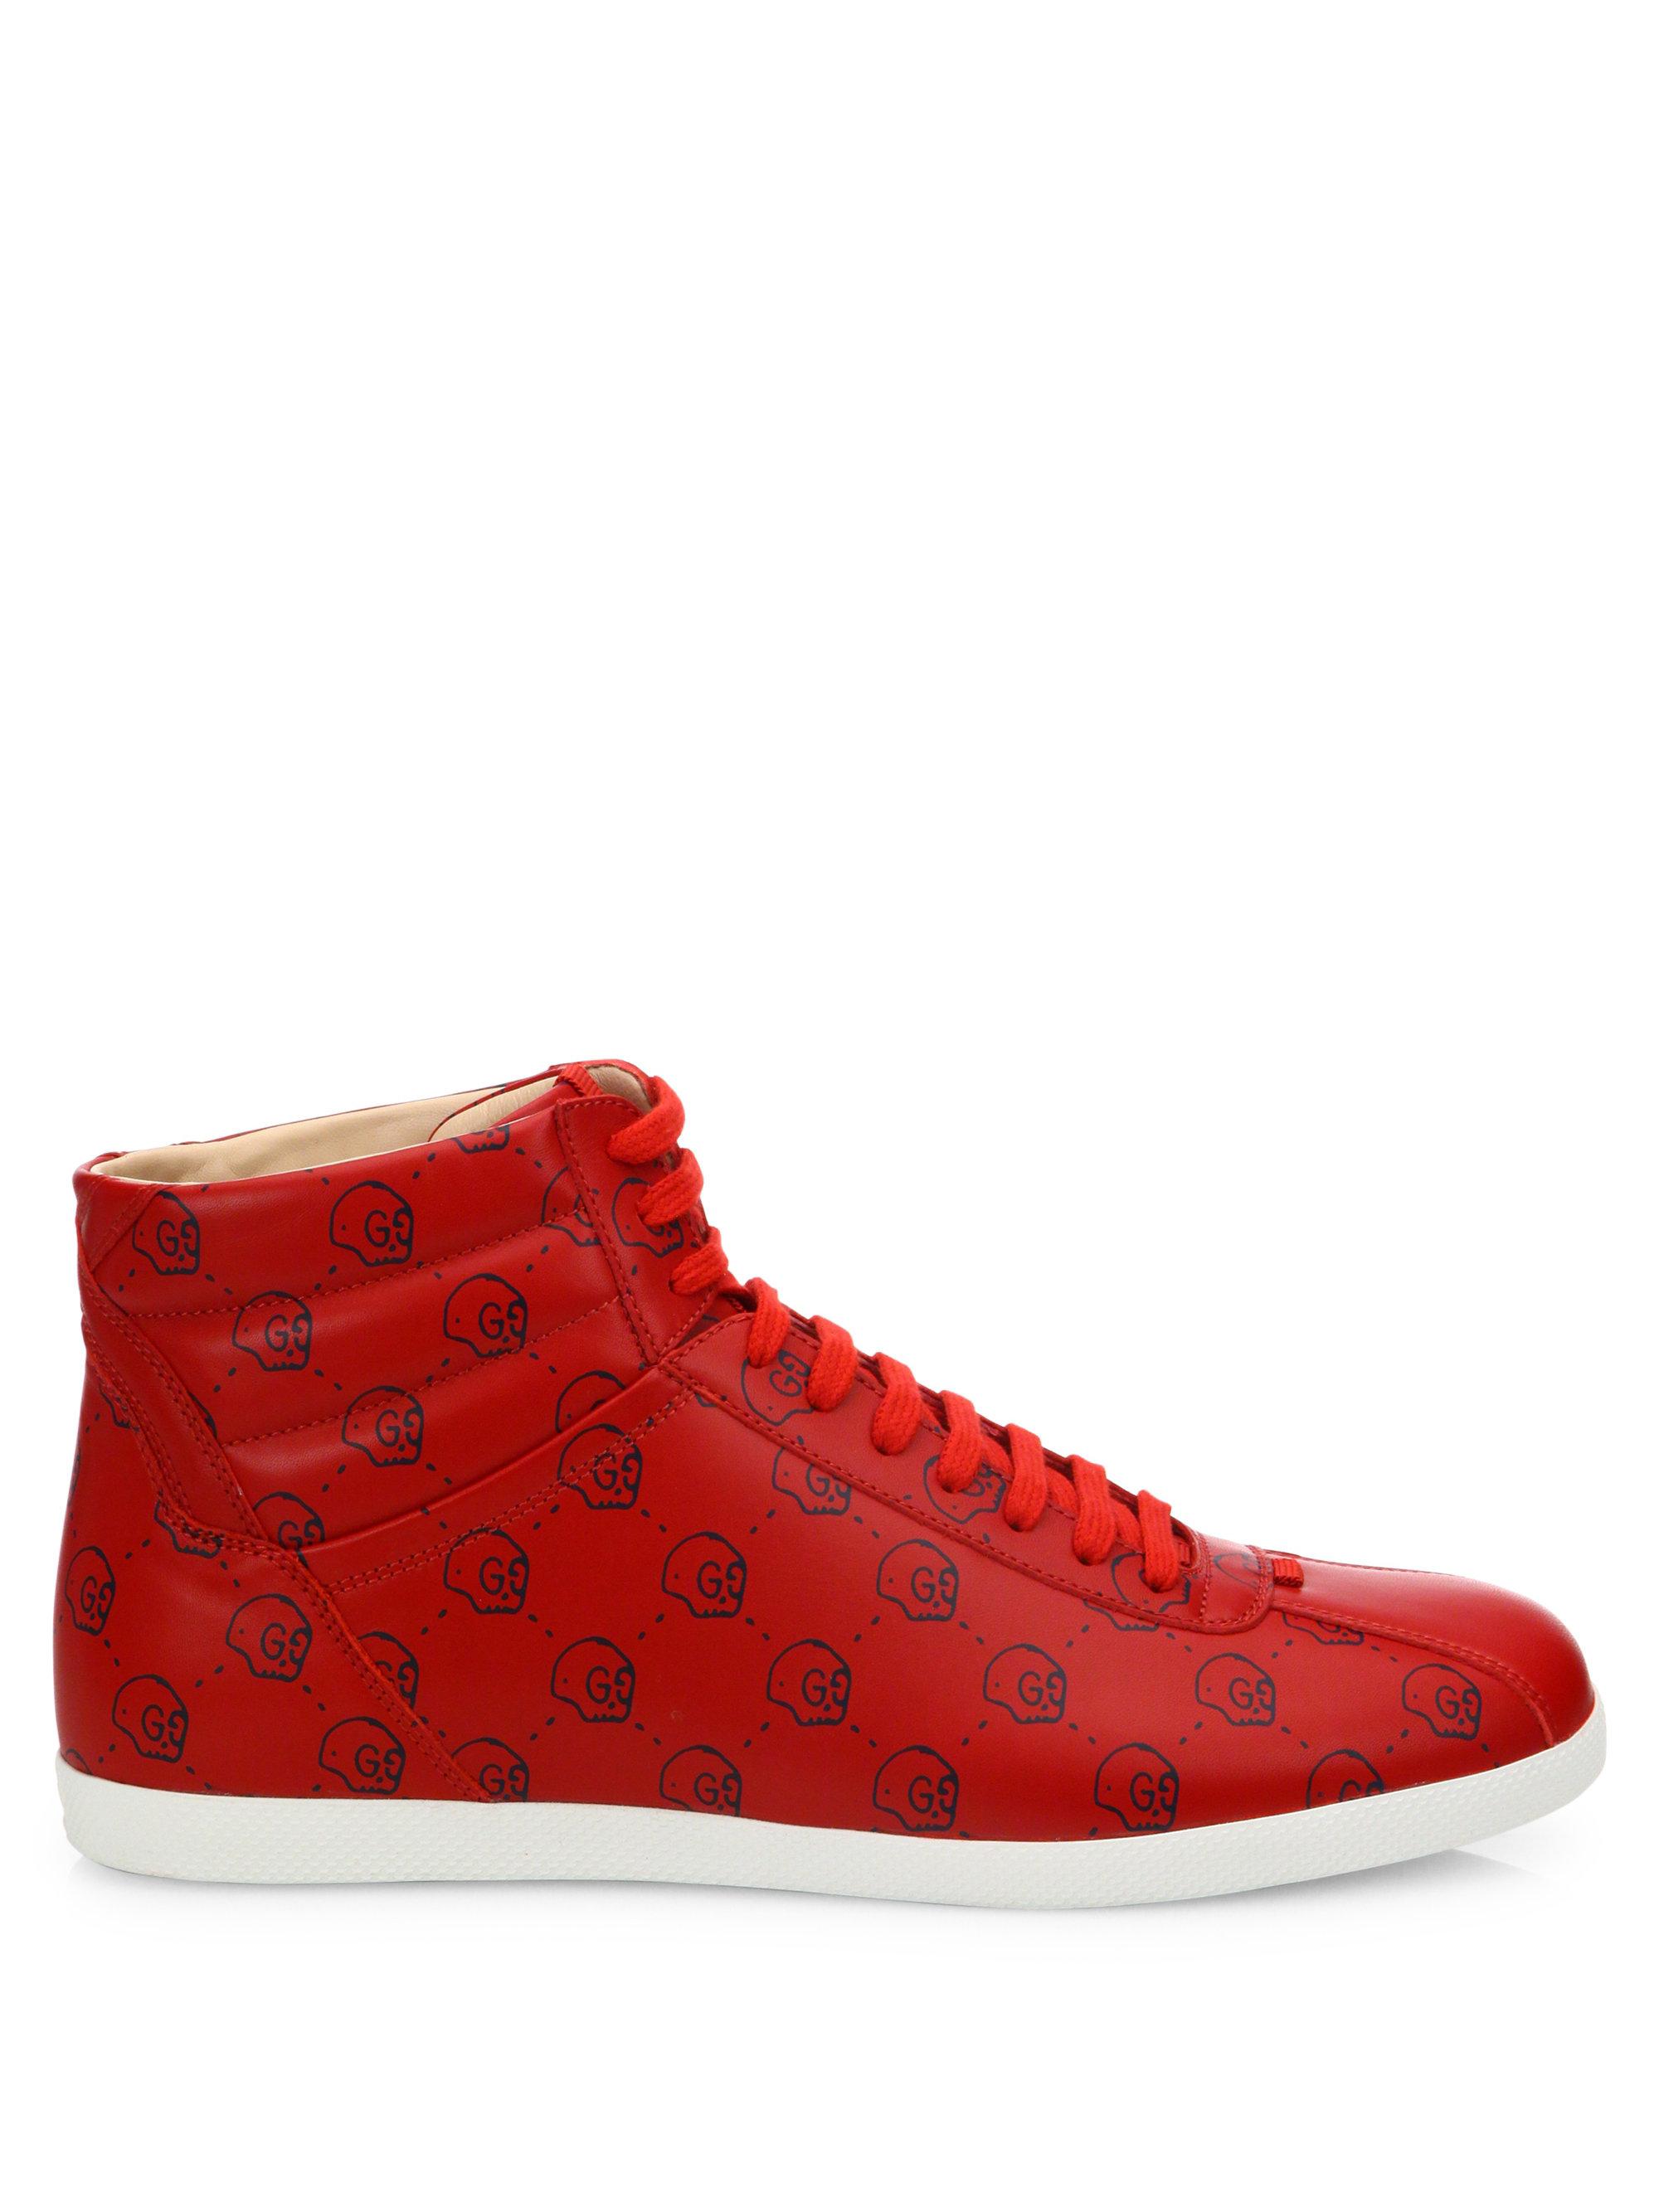 Gucci Leather Ghost Laceup Sneakers in Red for Men Lyst